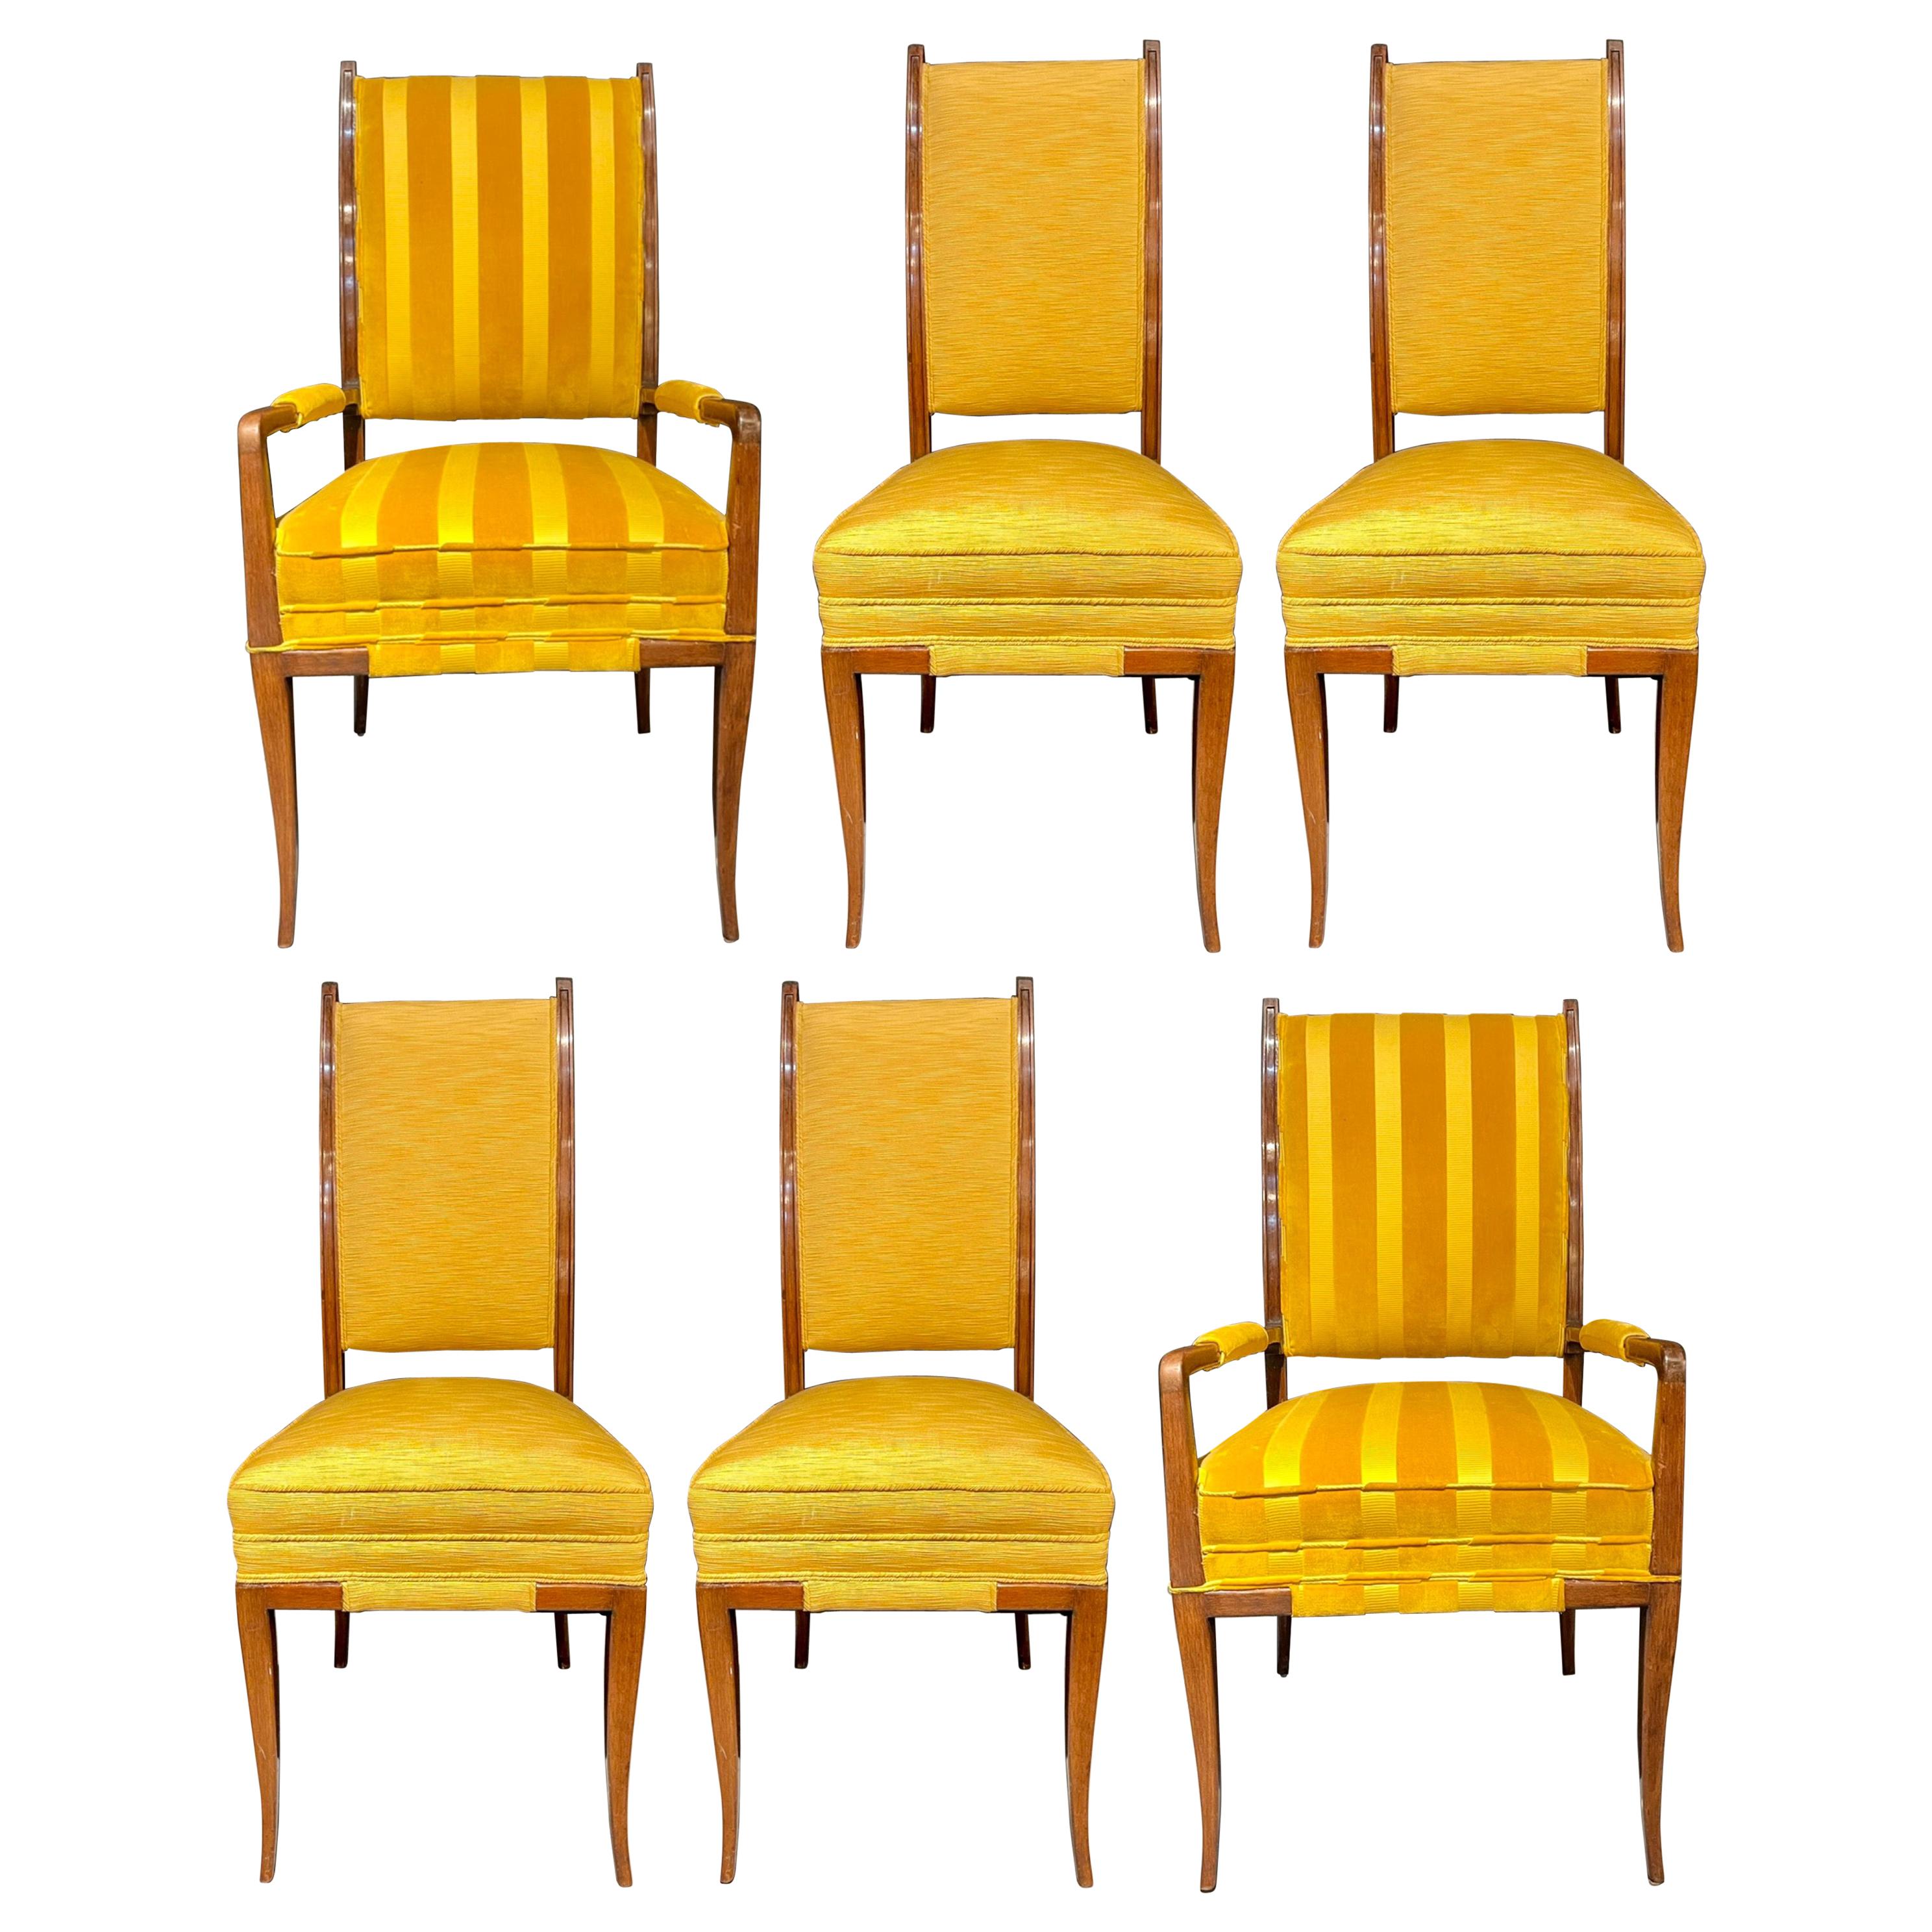 Tommi Parzinger, Mid-Century Modern, Dining Chairs, Brown Wood, Yellow Fabric